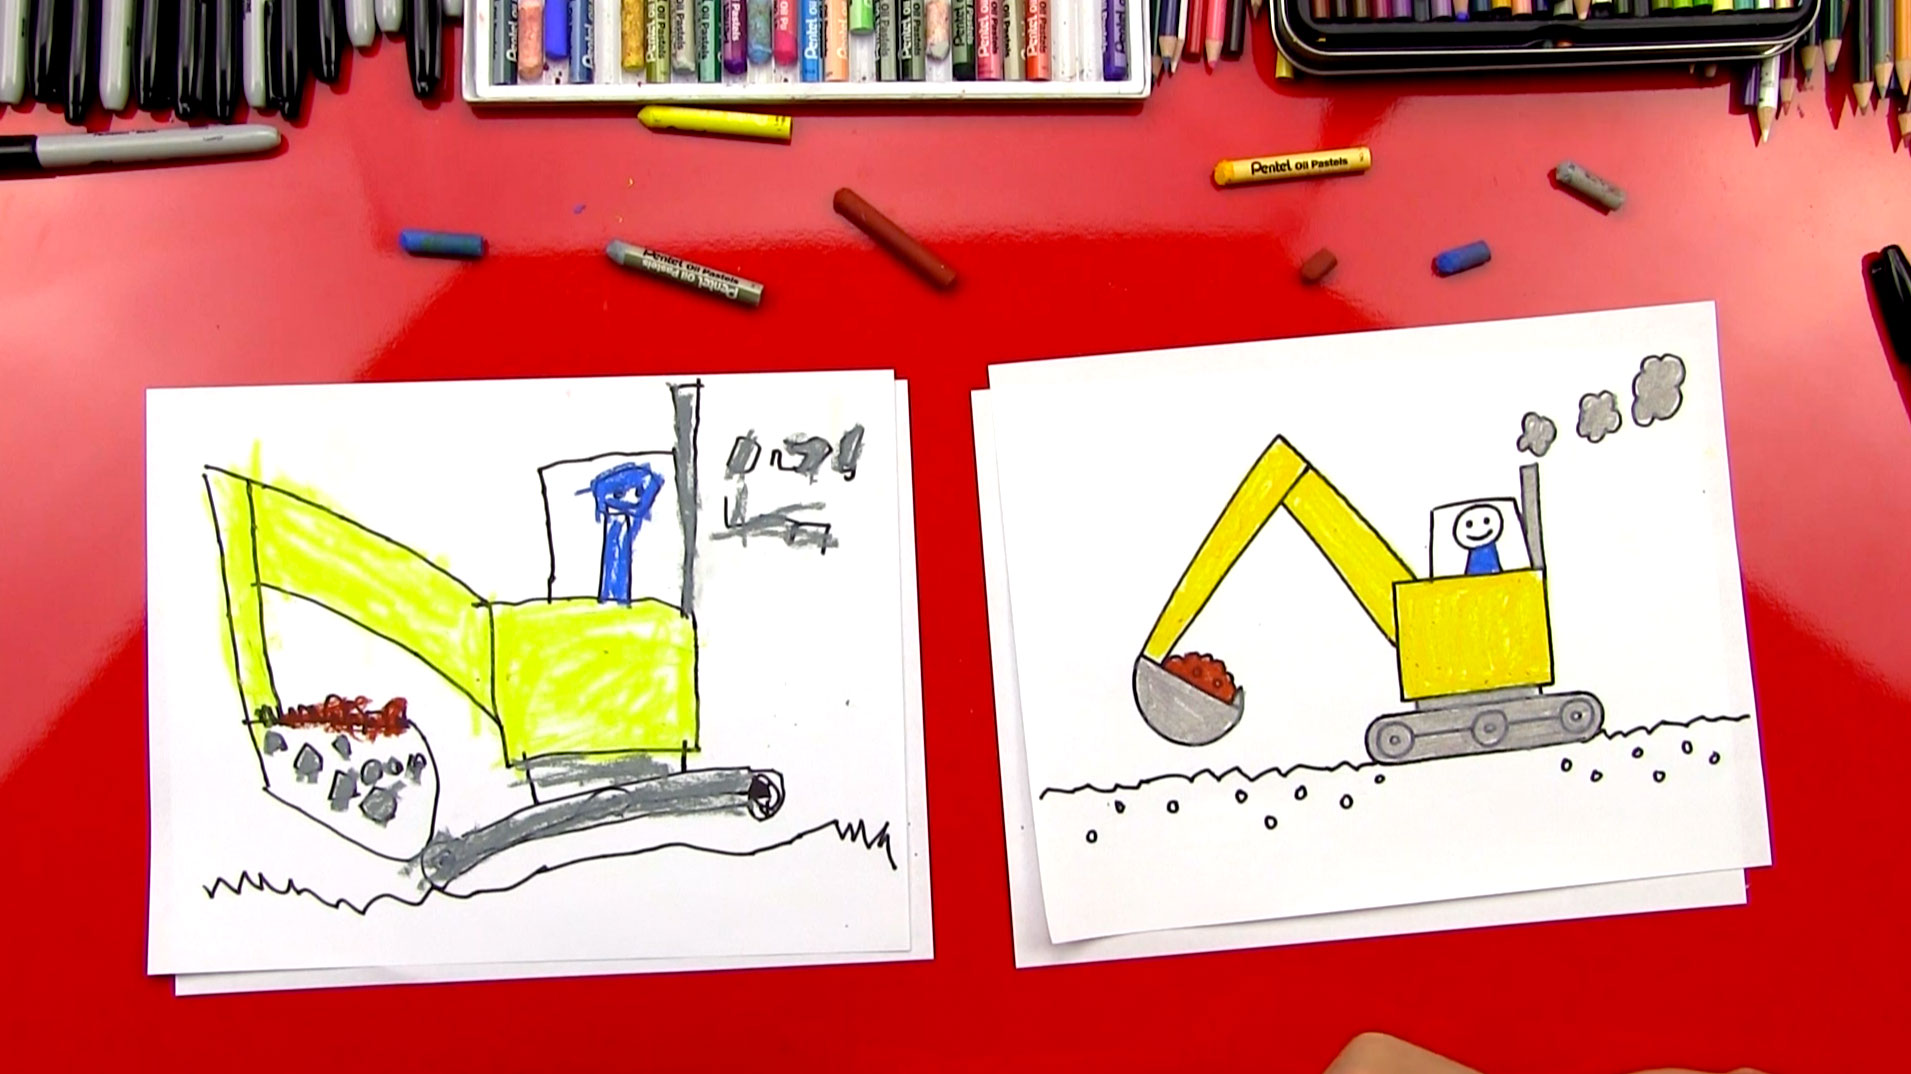 How To Draw An Excavator - Art For Kids Hub